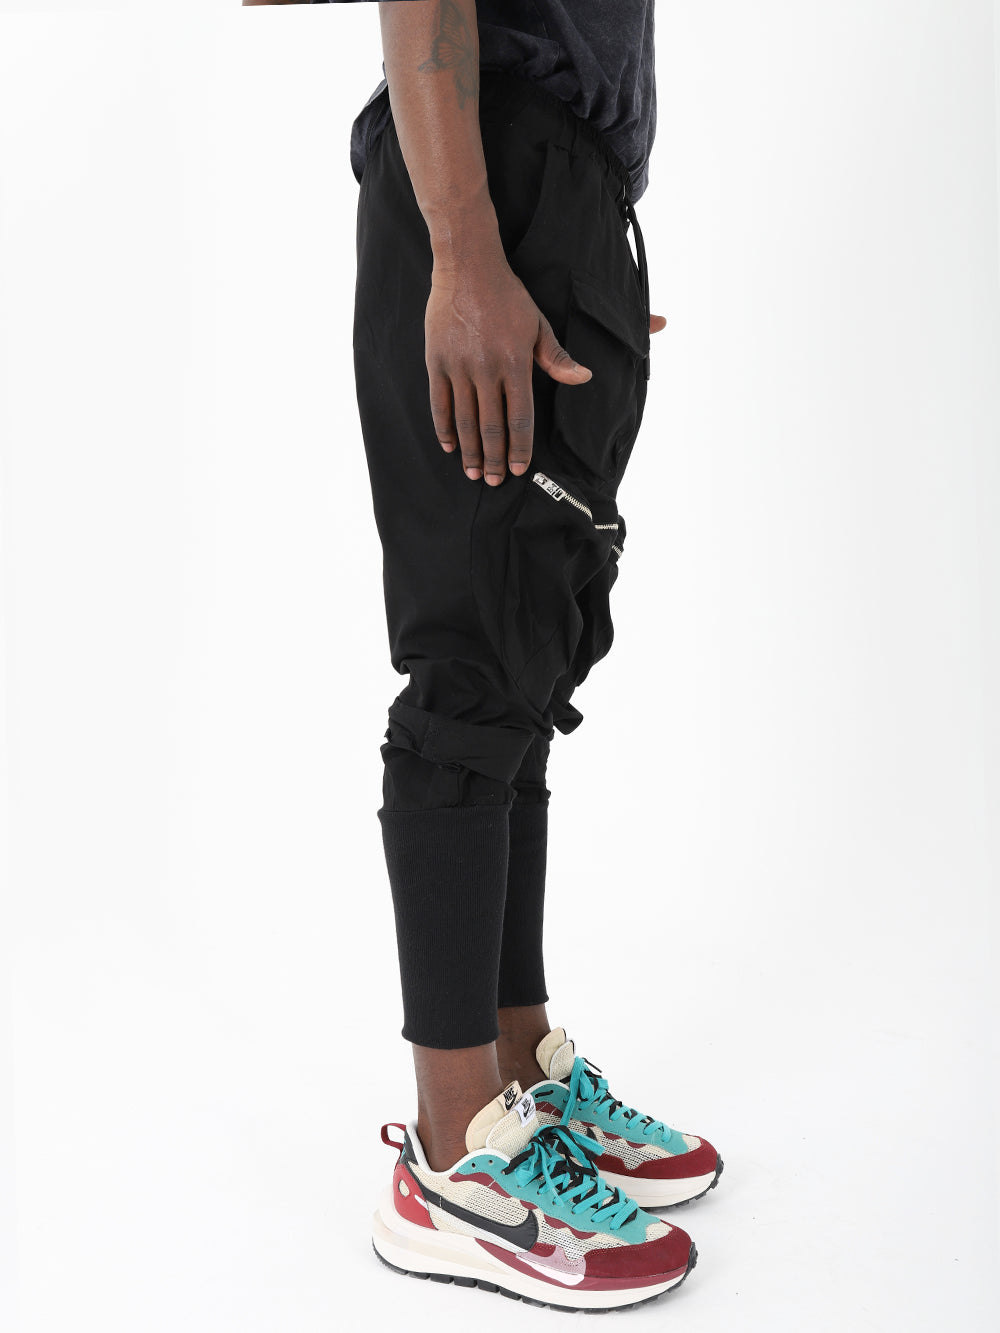 A man wearing MEREEN jogger pants and sneakers.